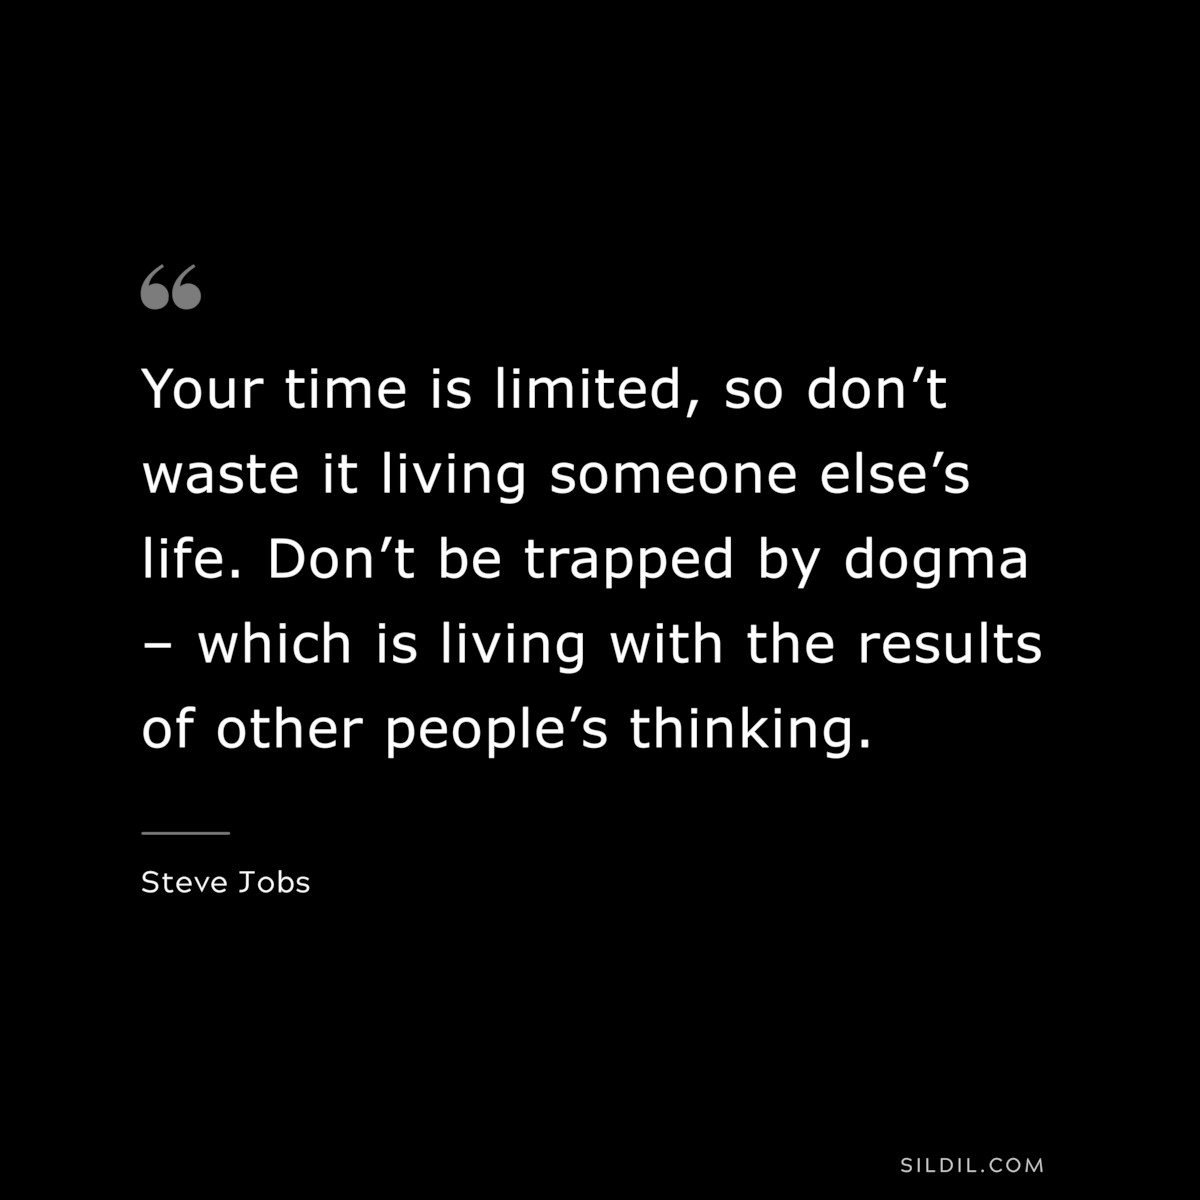 Your time is limited, so don’t waste it living someone else’s life. Don’t be trapped by dogma – which is living with the results of other people’s thinking. ― Steve Jobs